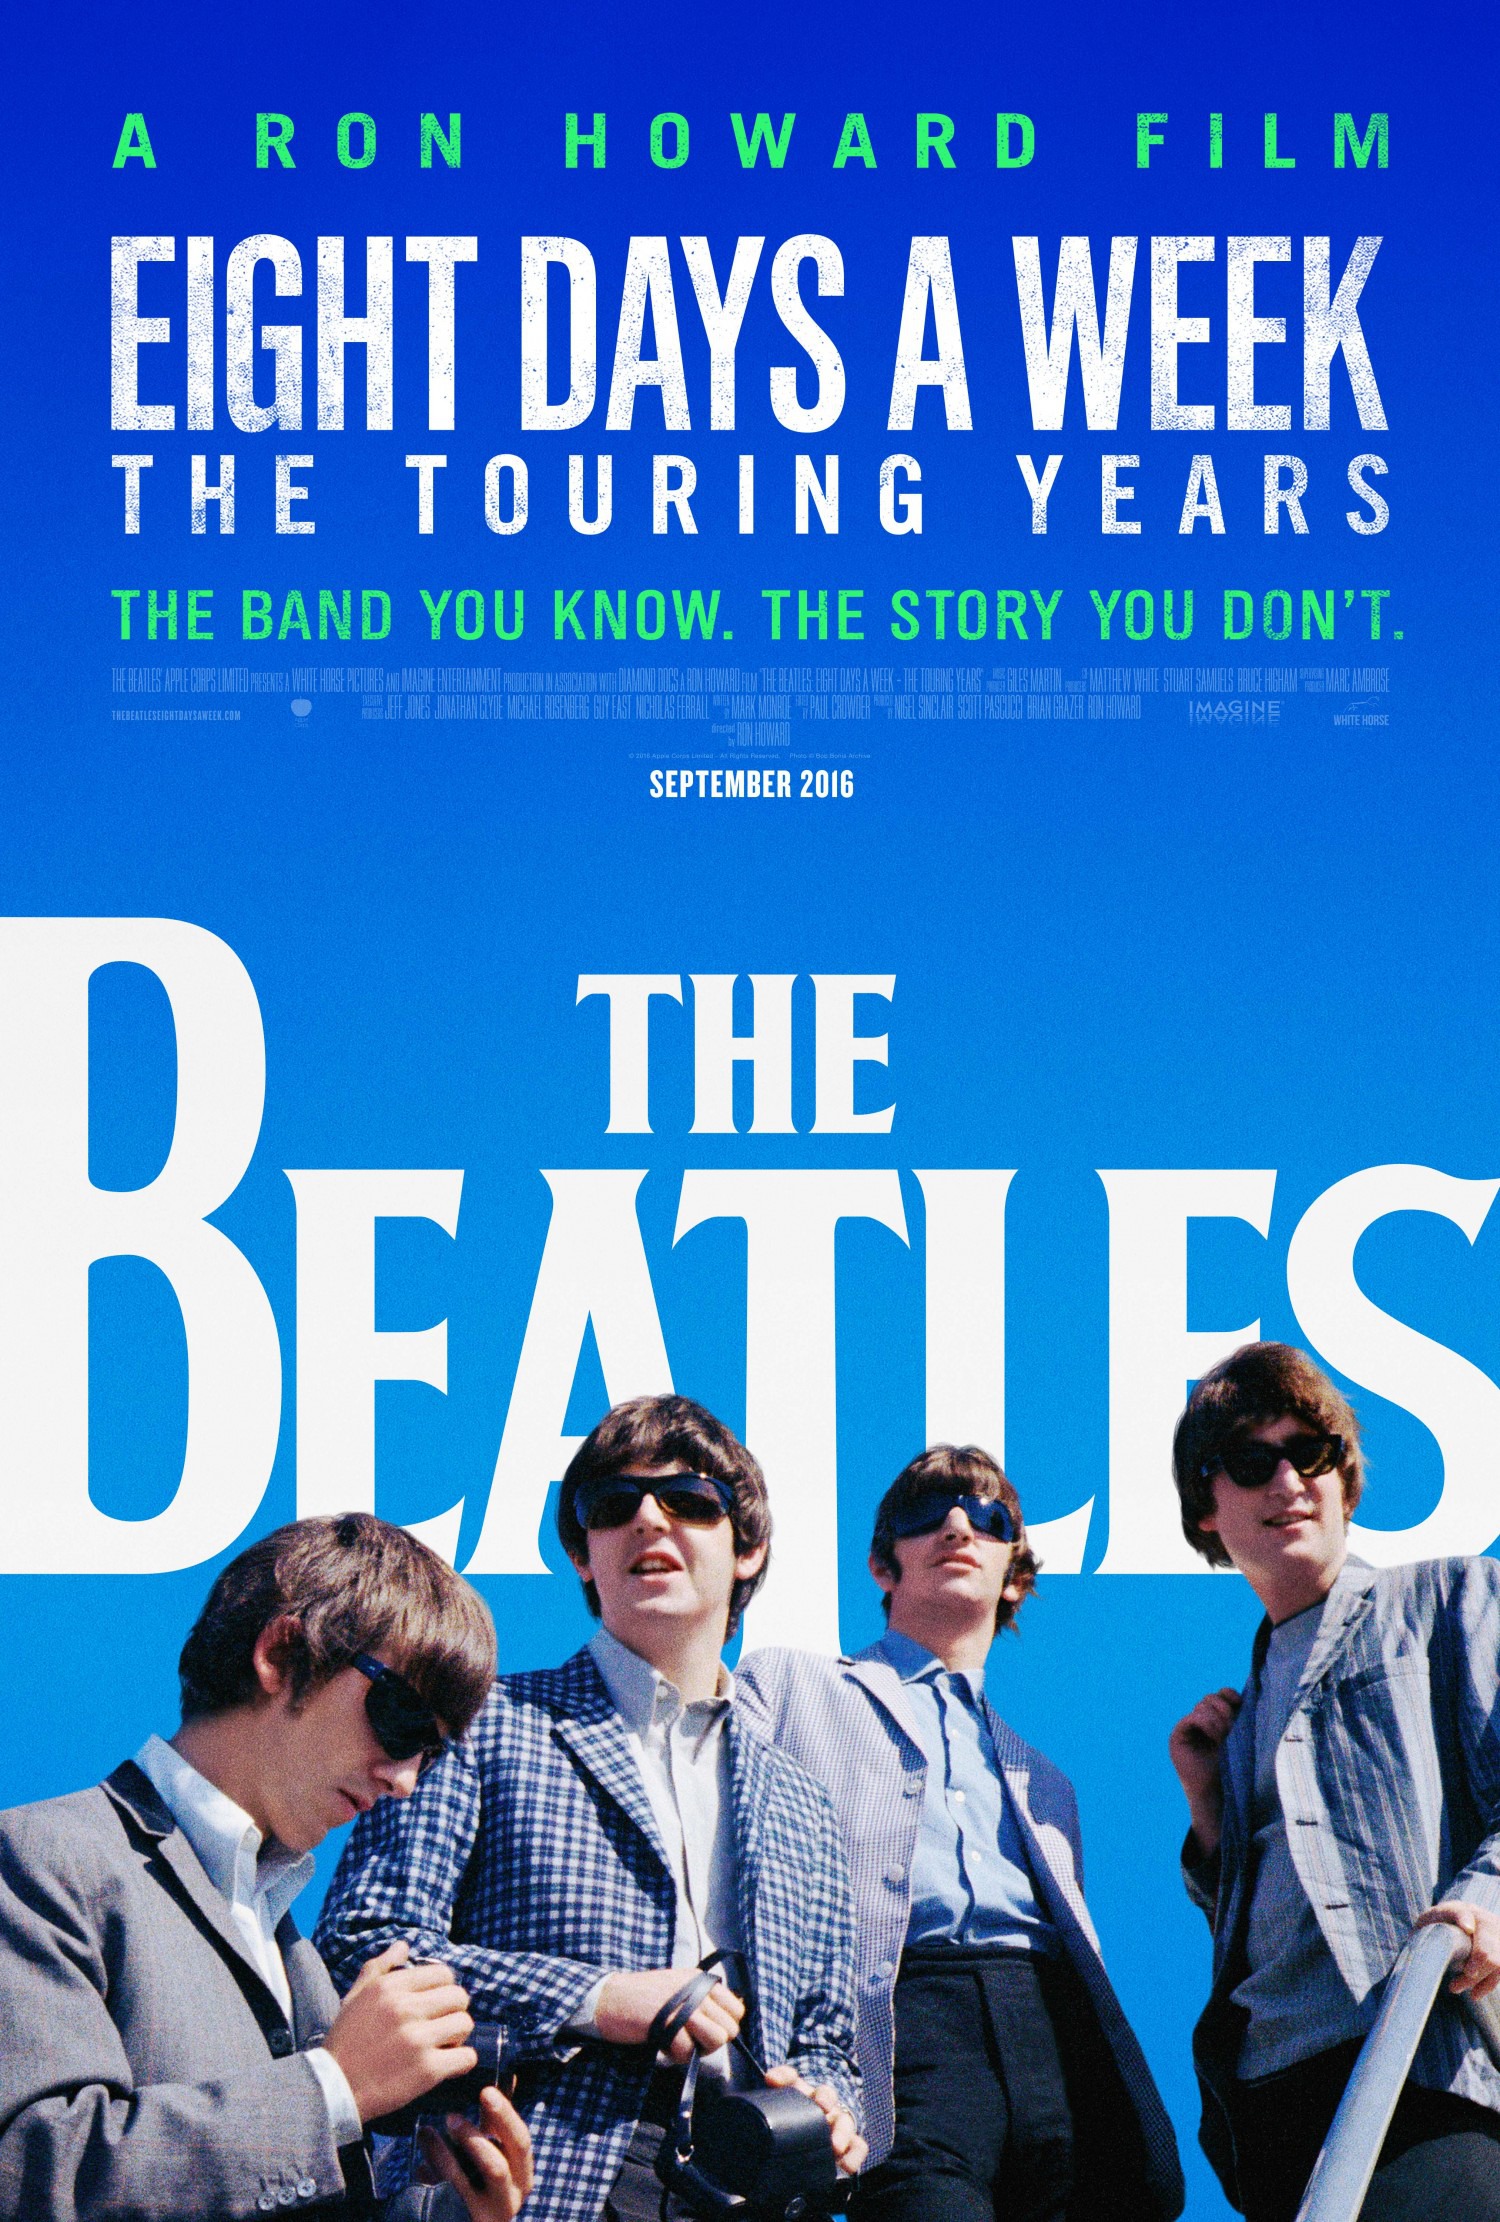 Mega Sized Movie Poster Image for The Beatles: Eight Days a Week 